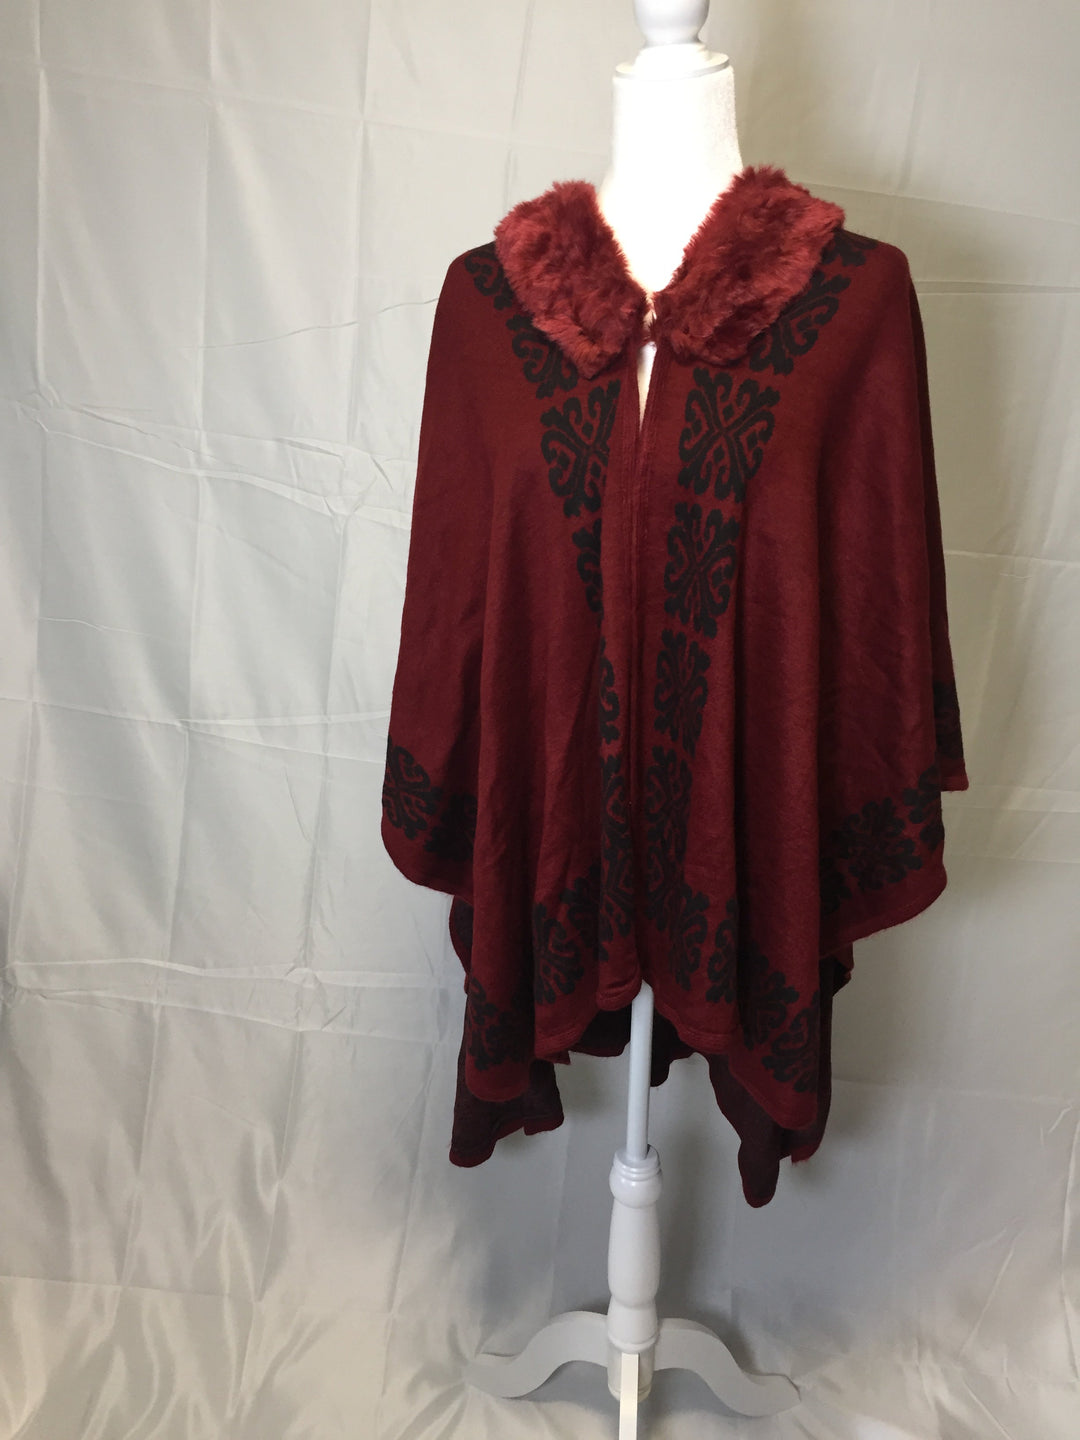 Knitted Poncho Wrap Shawl Cape with Faux Fur Trim & Clasp